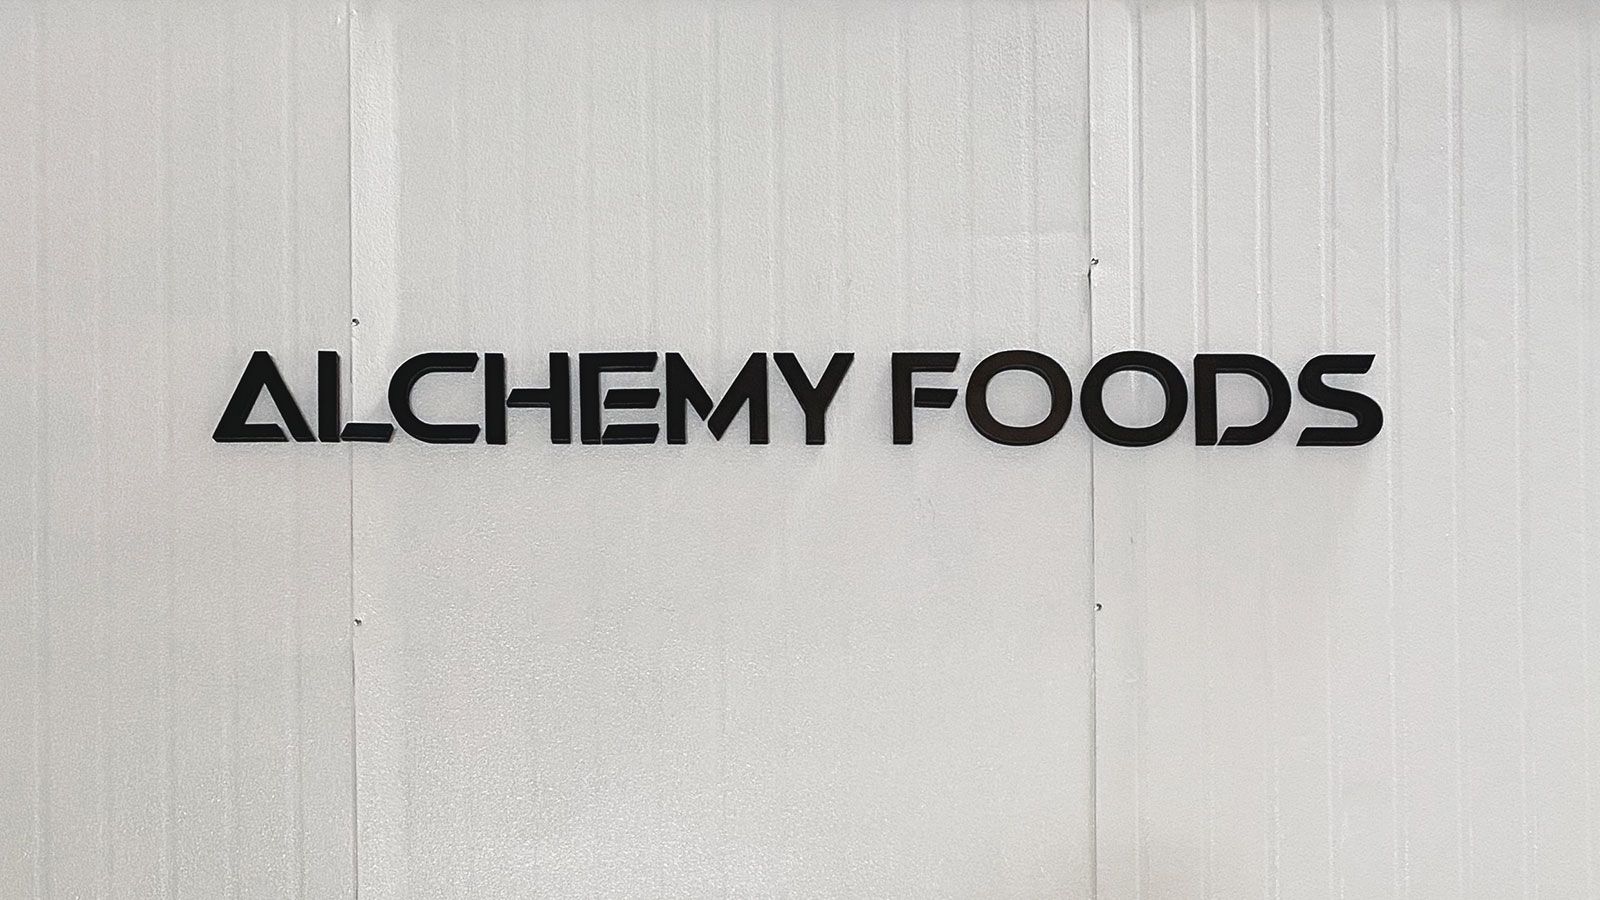 Alchemy Foods 3D letters